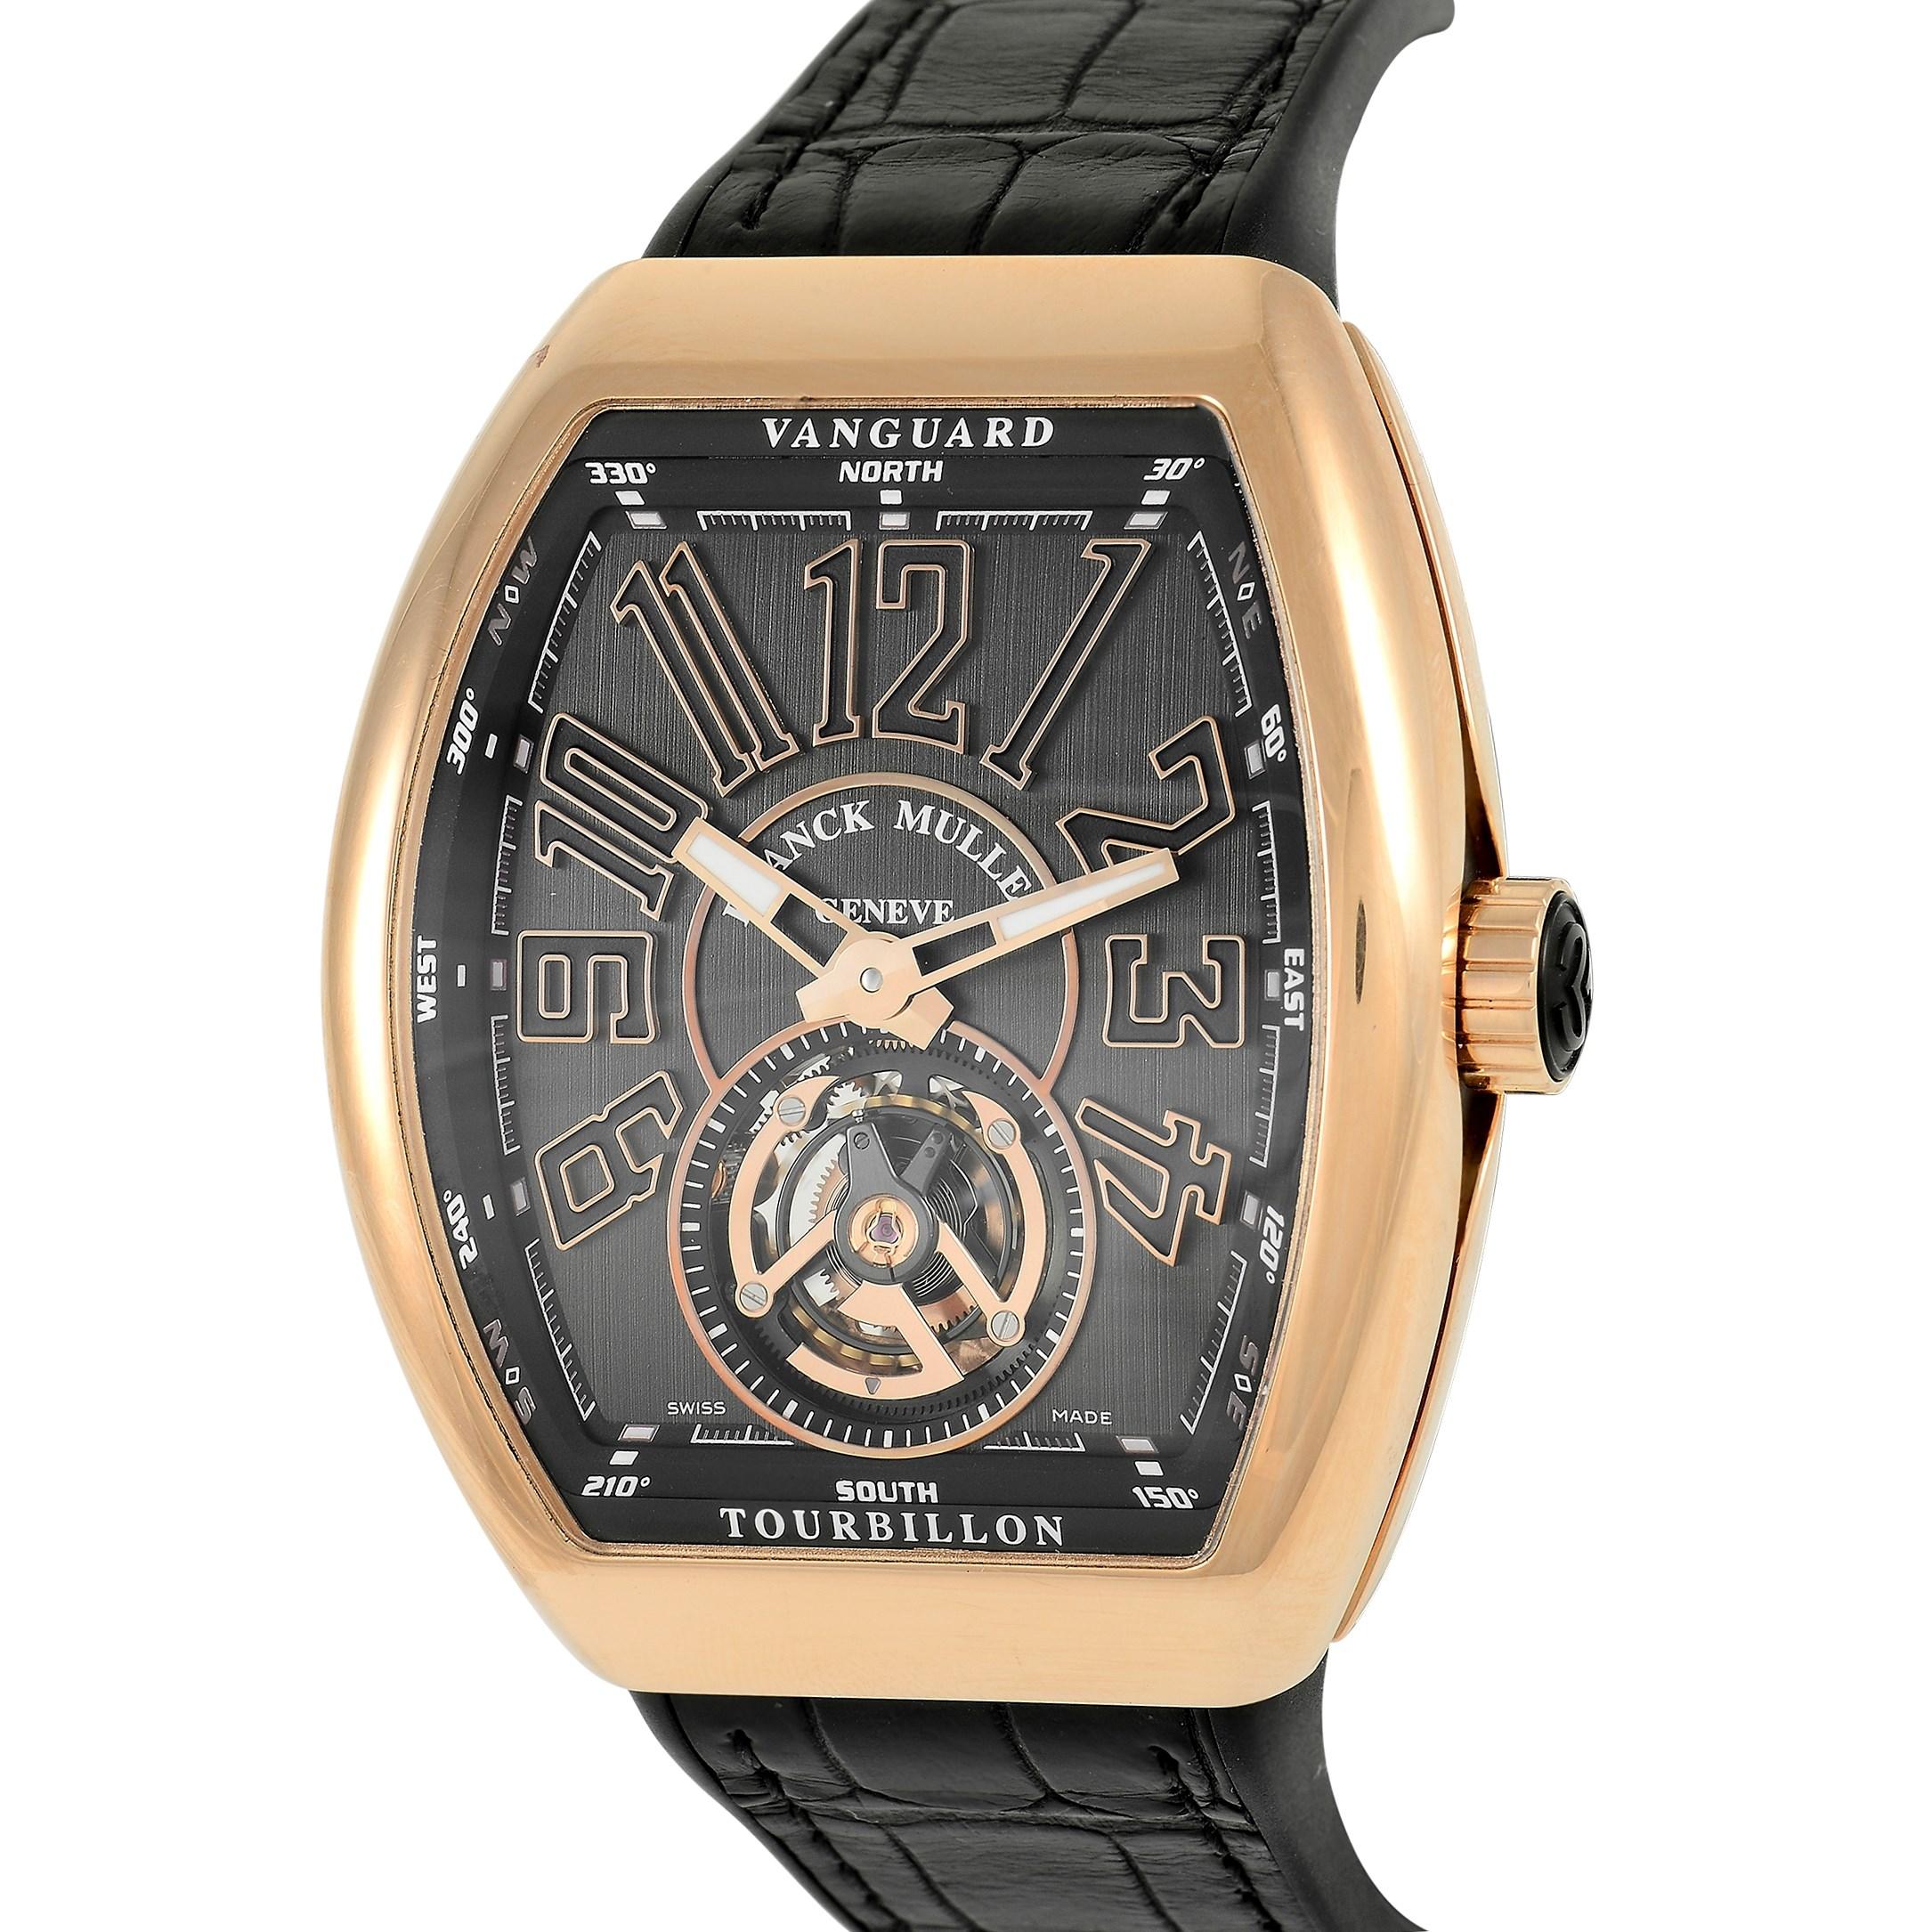 The Franck Mueller Vanguard Watch, reference number V 45 T 5N NR, is a bold accessory that will add visual impact to any ensemble it’s paired with.

This bold watch case and bezel are crafted from 18K Rose Gold, which is perfectly juxtaposed with